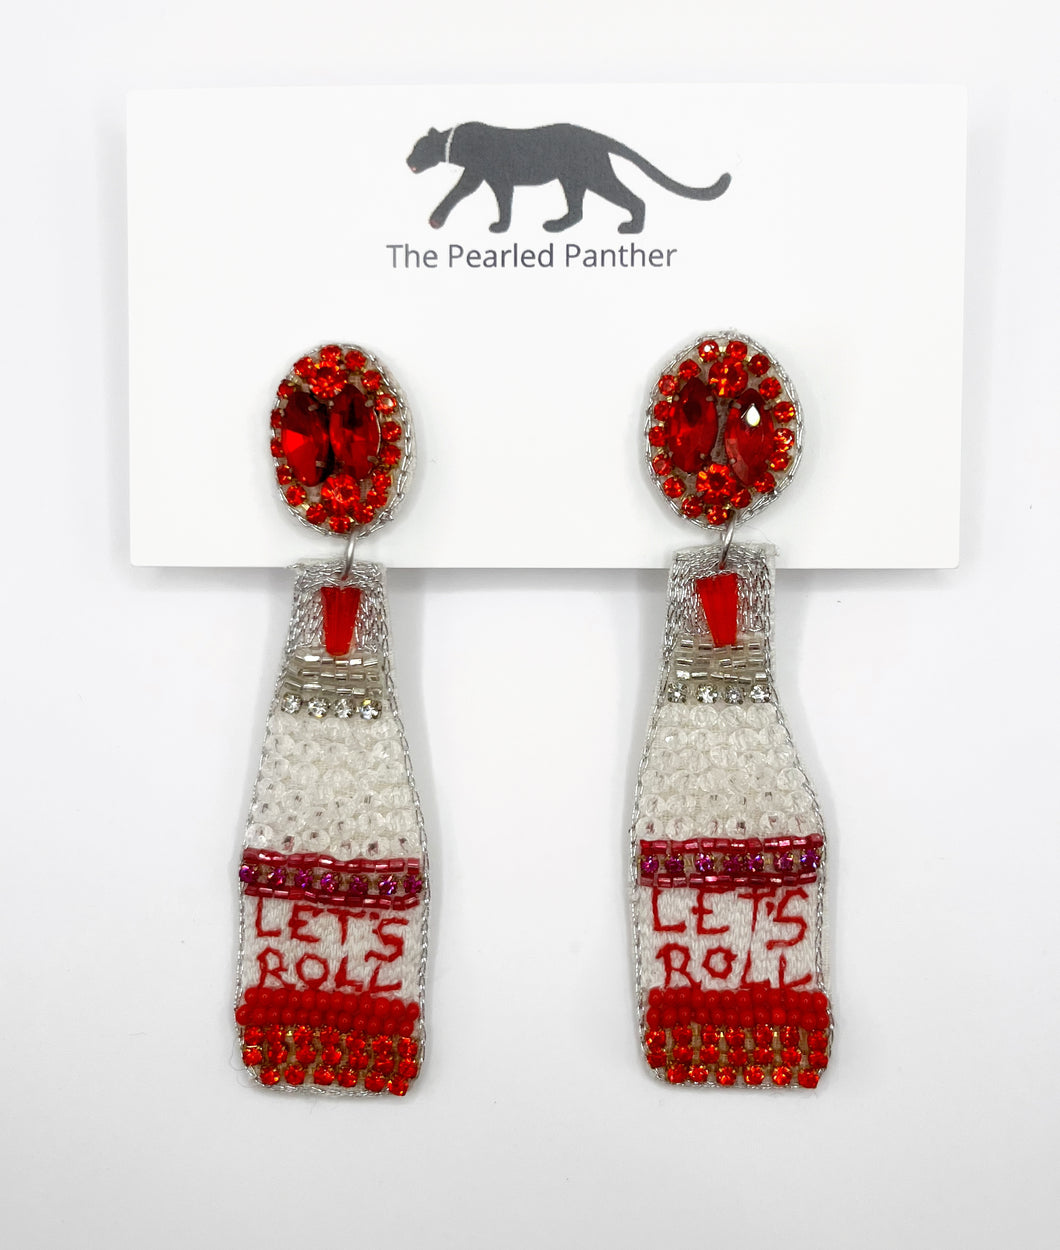 Alabama “Let’s Roll” Beaded Statement Earrings/ Game Day/ Tailgate Fashion